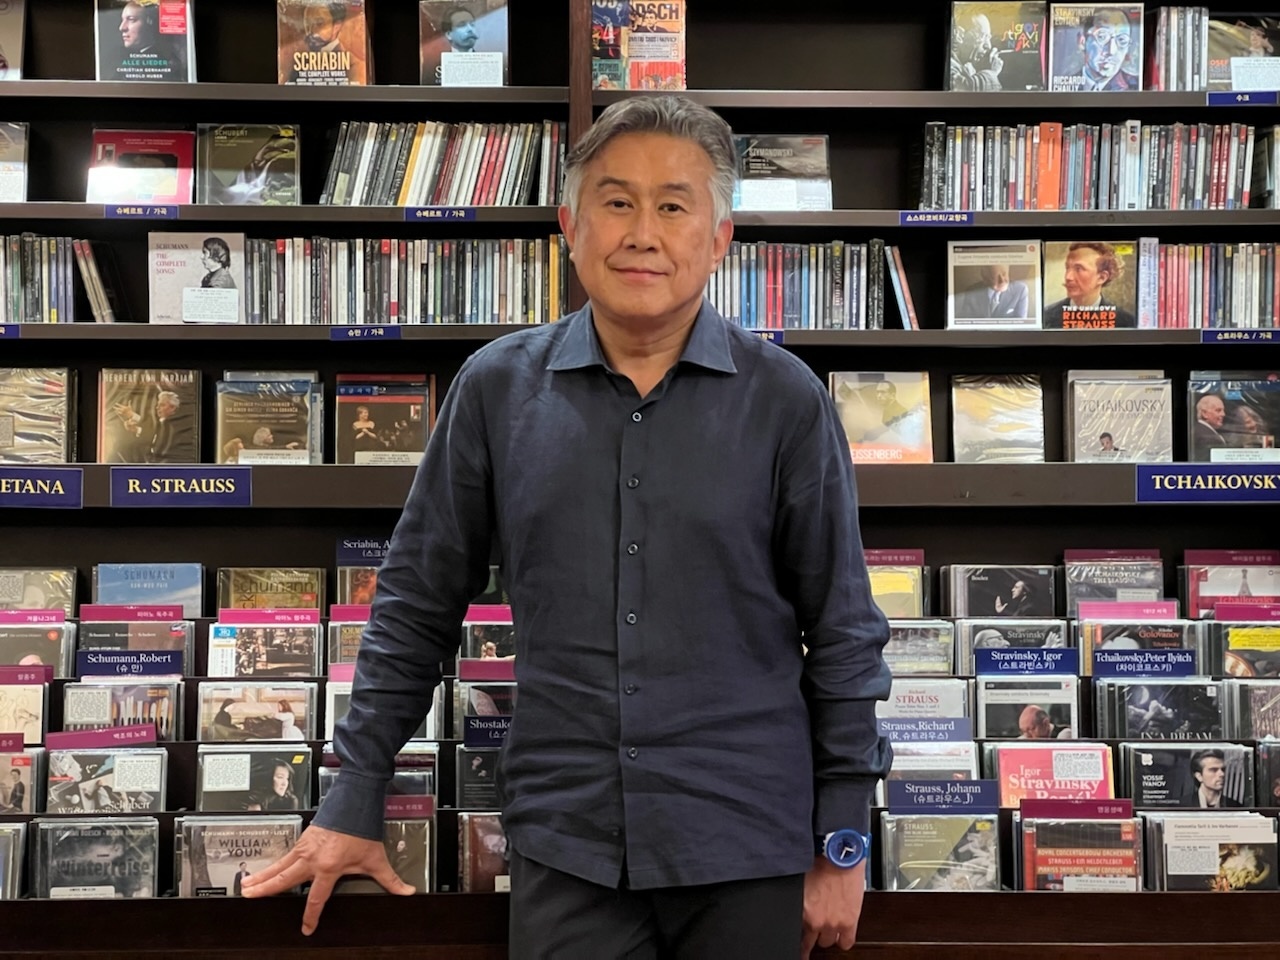 Pungwoldang founder Park Jong-ho poses for a photo after an interview at his record store in Sinsa-dong, Gangnam-gu, Seoul, Monday. (The Korea Herald)